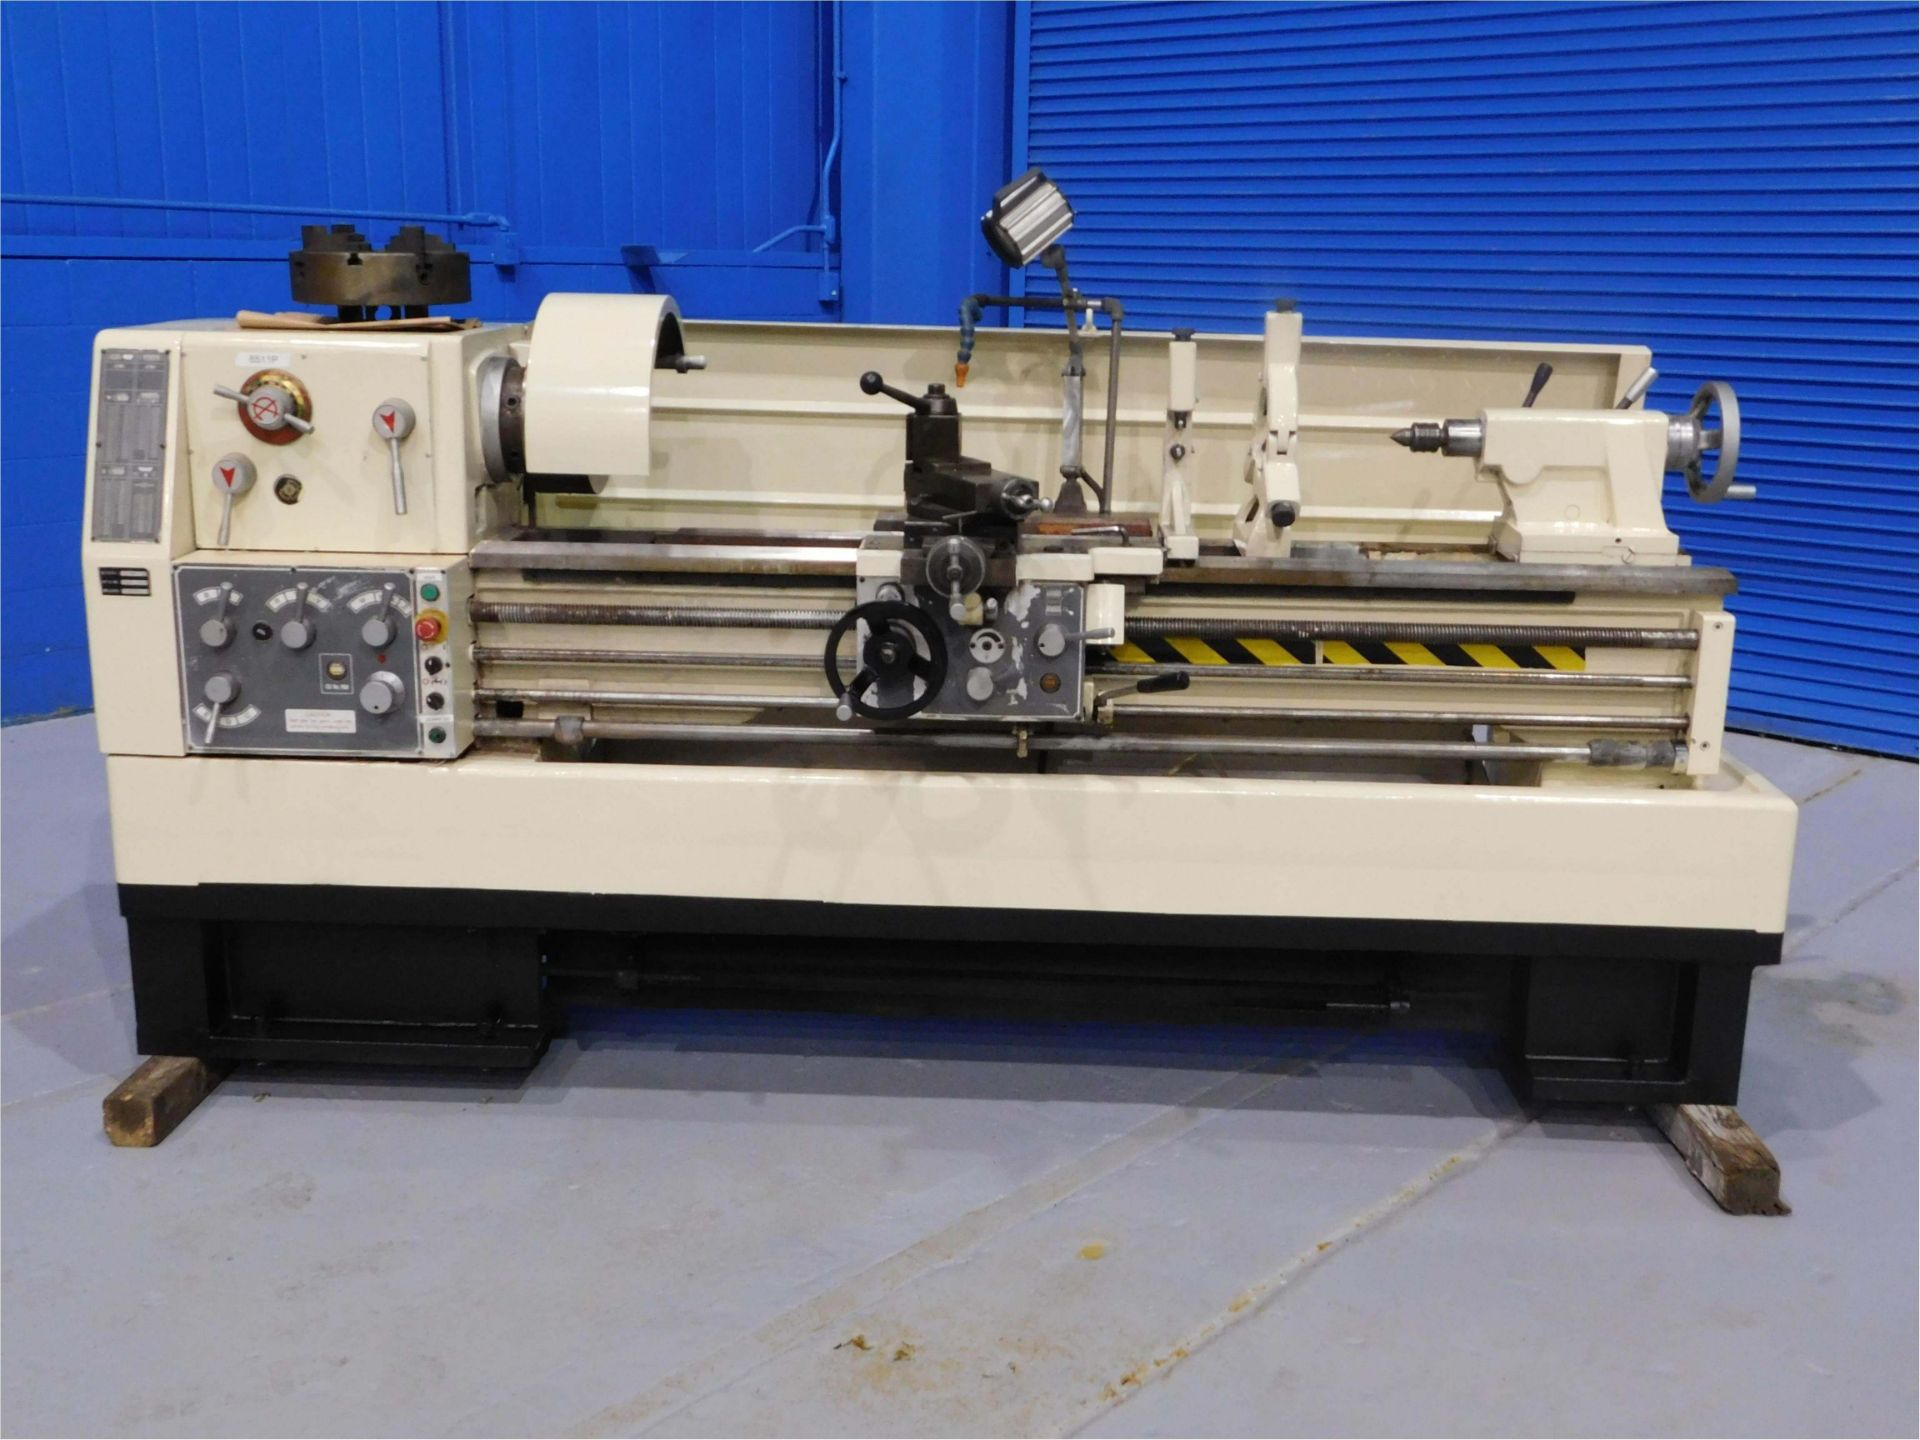 2007 Vectrax Engine Lathe, 16" x 60", Mdl: DY-410-1500, S/N: AY-A6-068 (6511P) (Located In